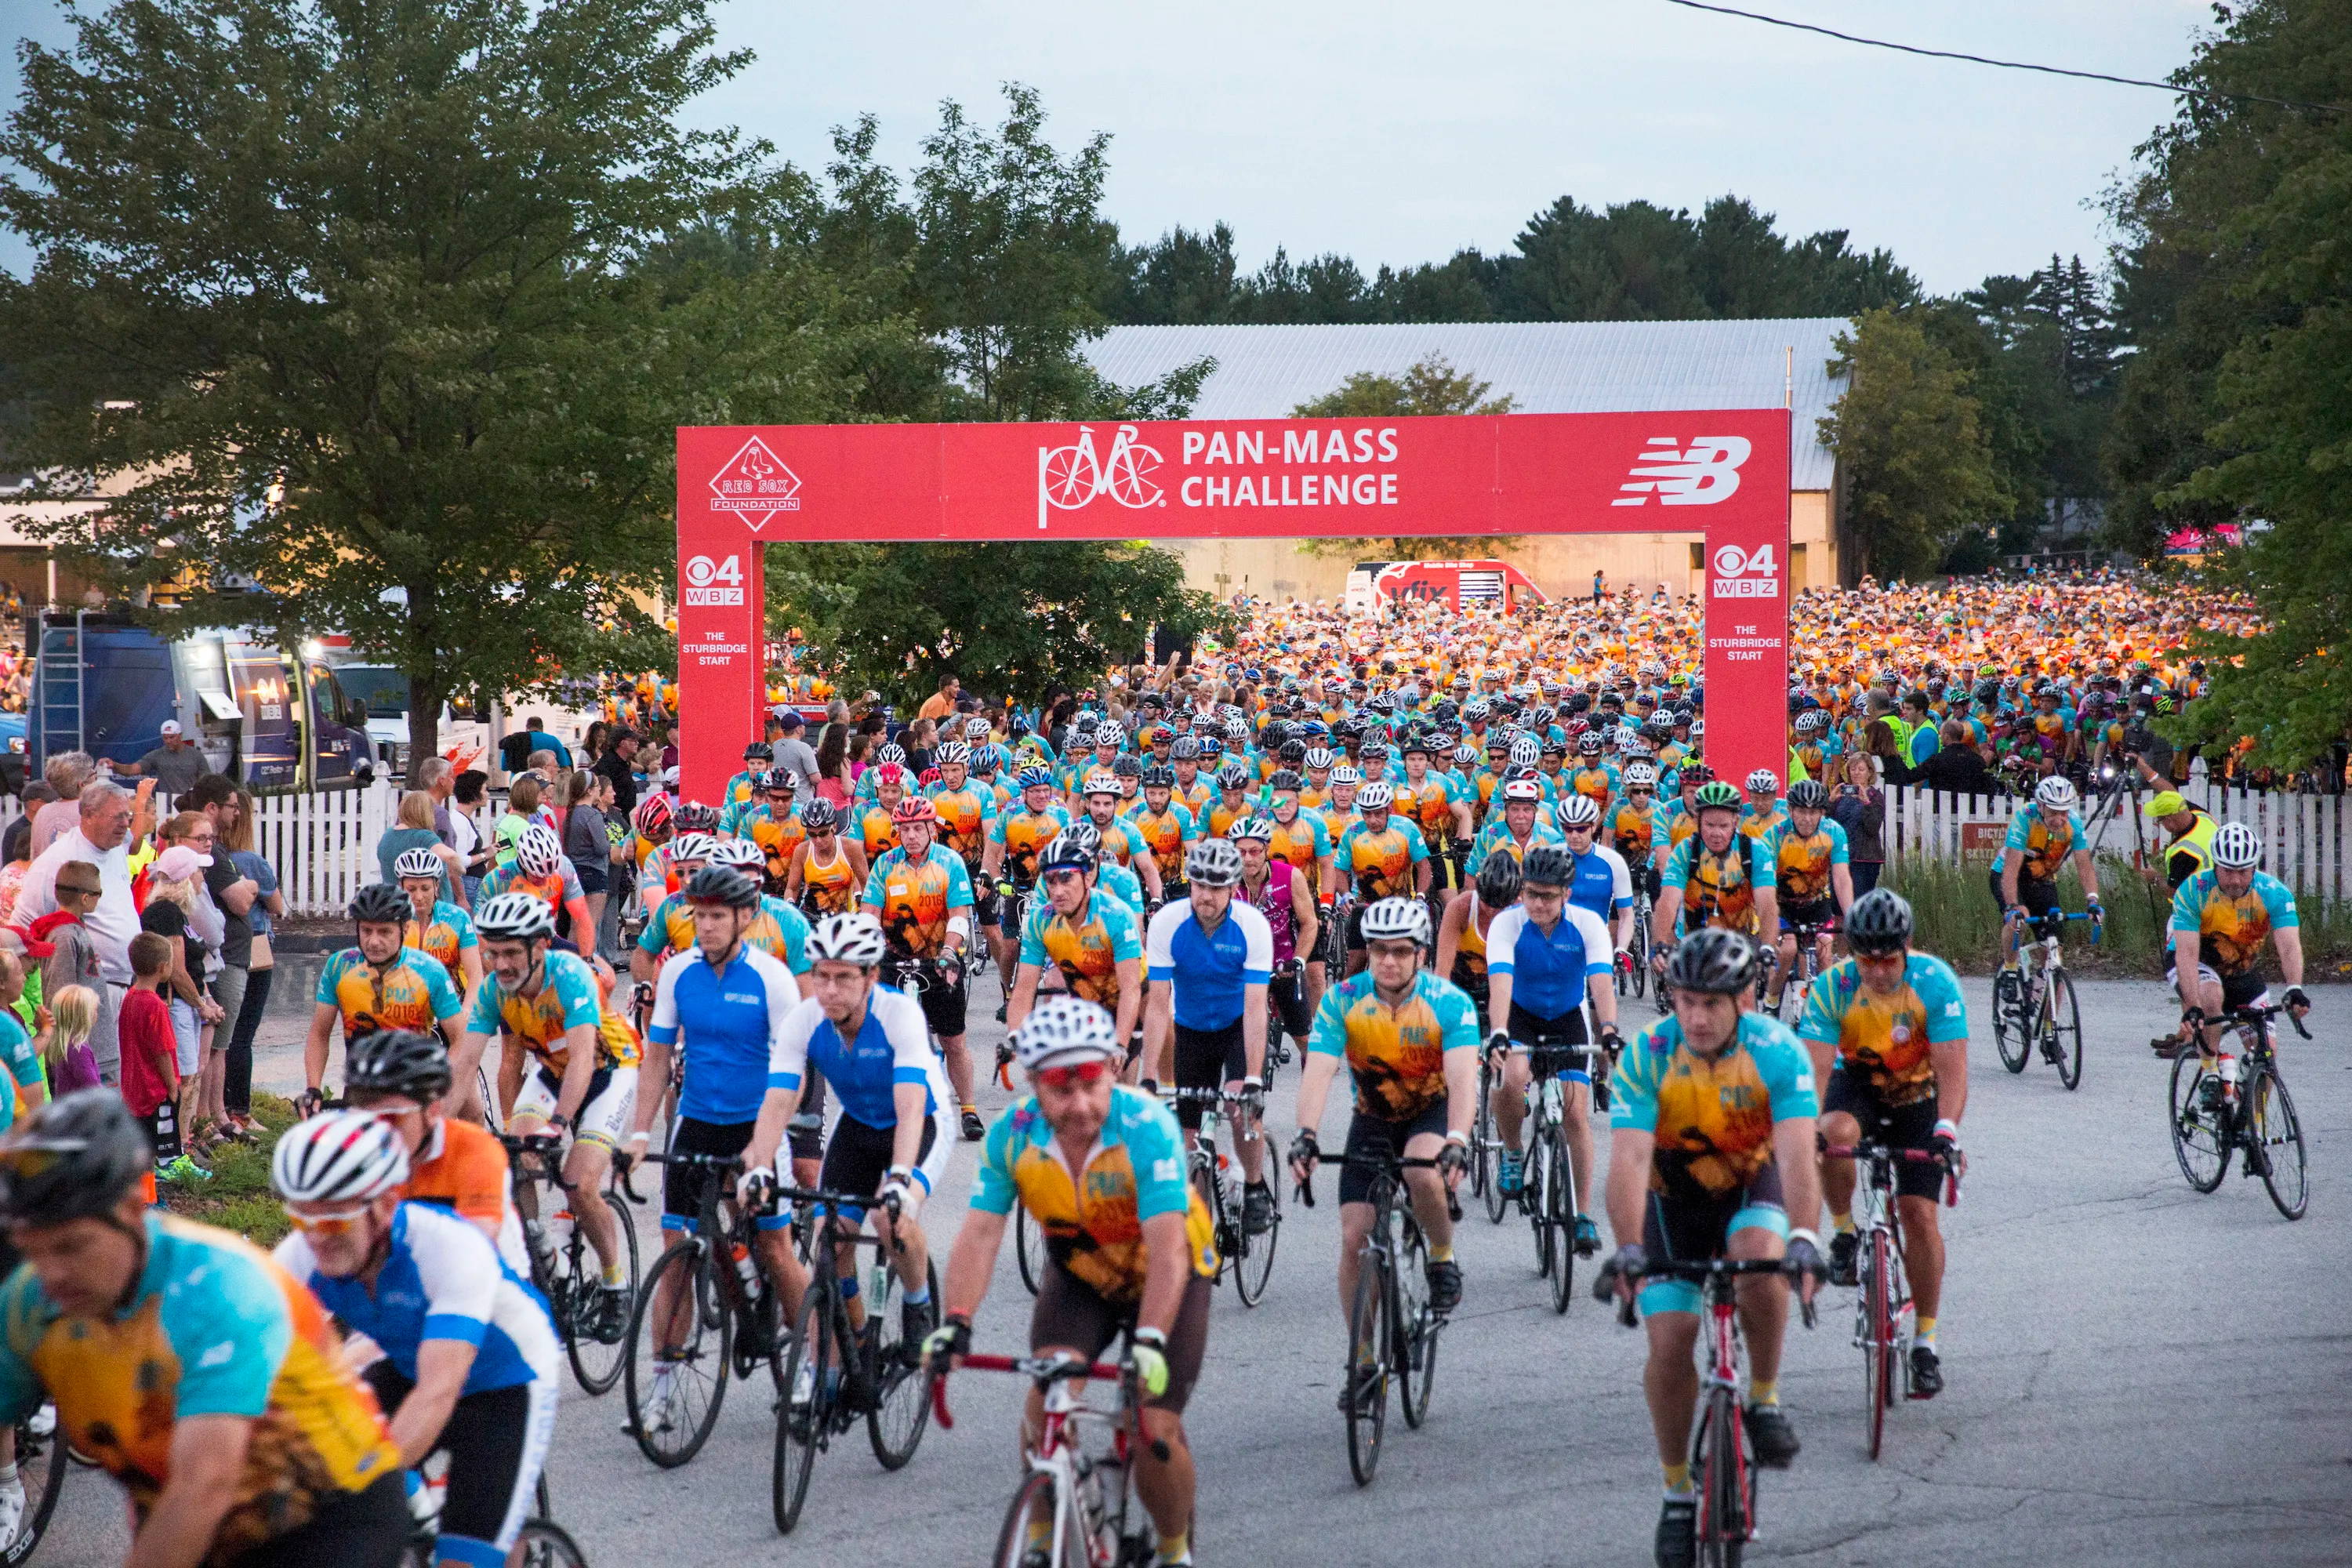 Pan-Mass Challenge, Outdoor Cycling, Dana Farber Cancer Institute